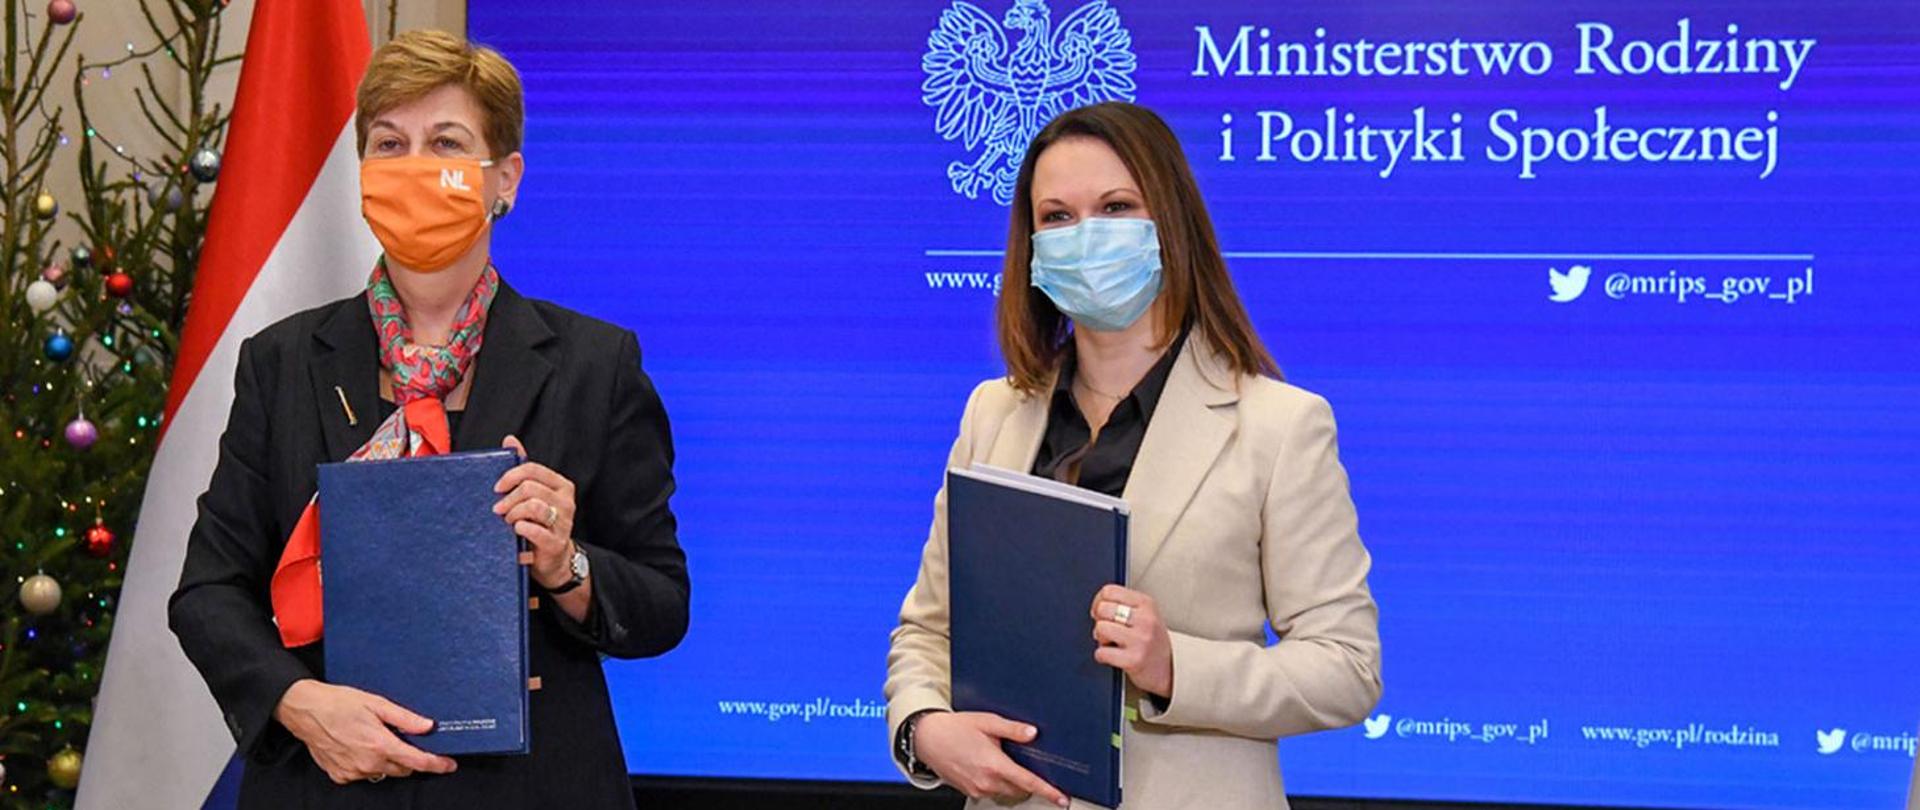 Polish-Dutch agreement on workers’ rights